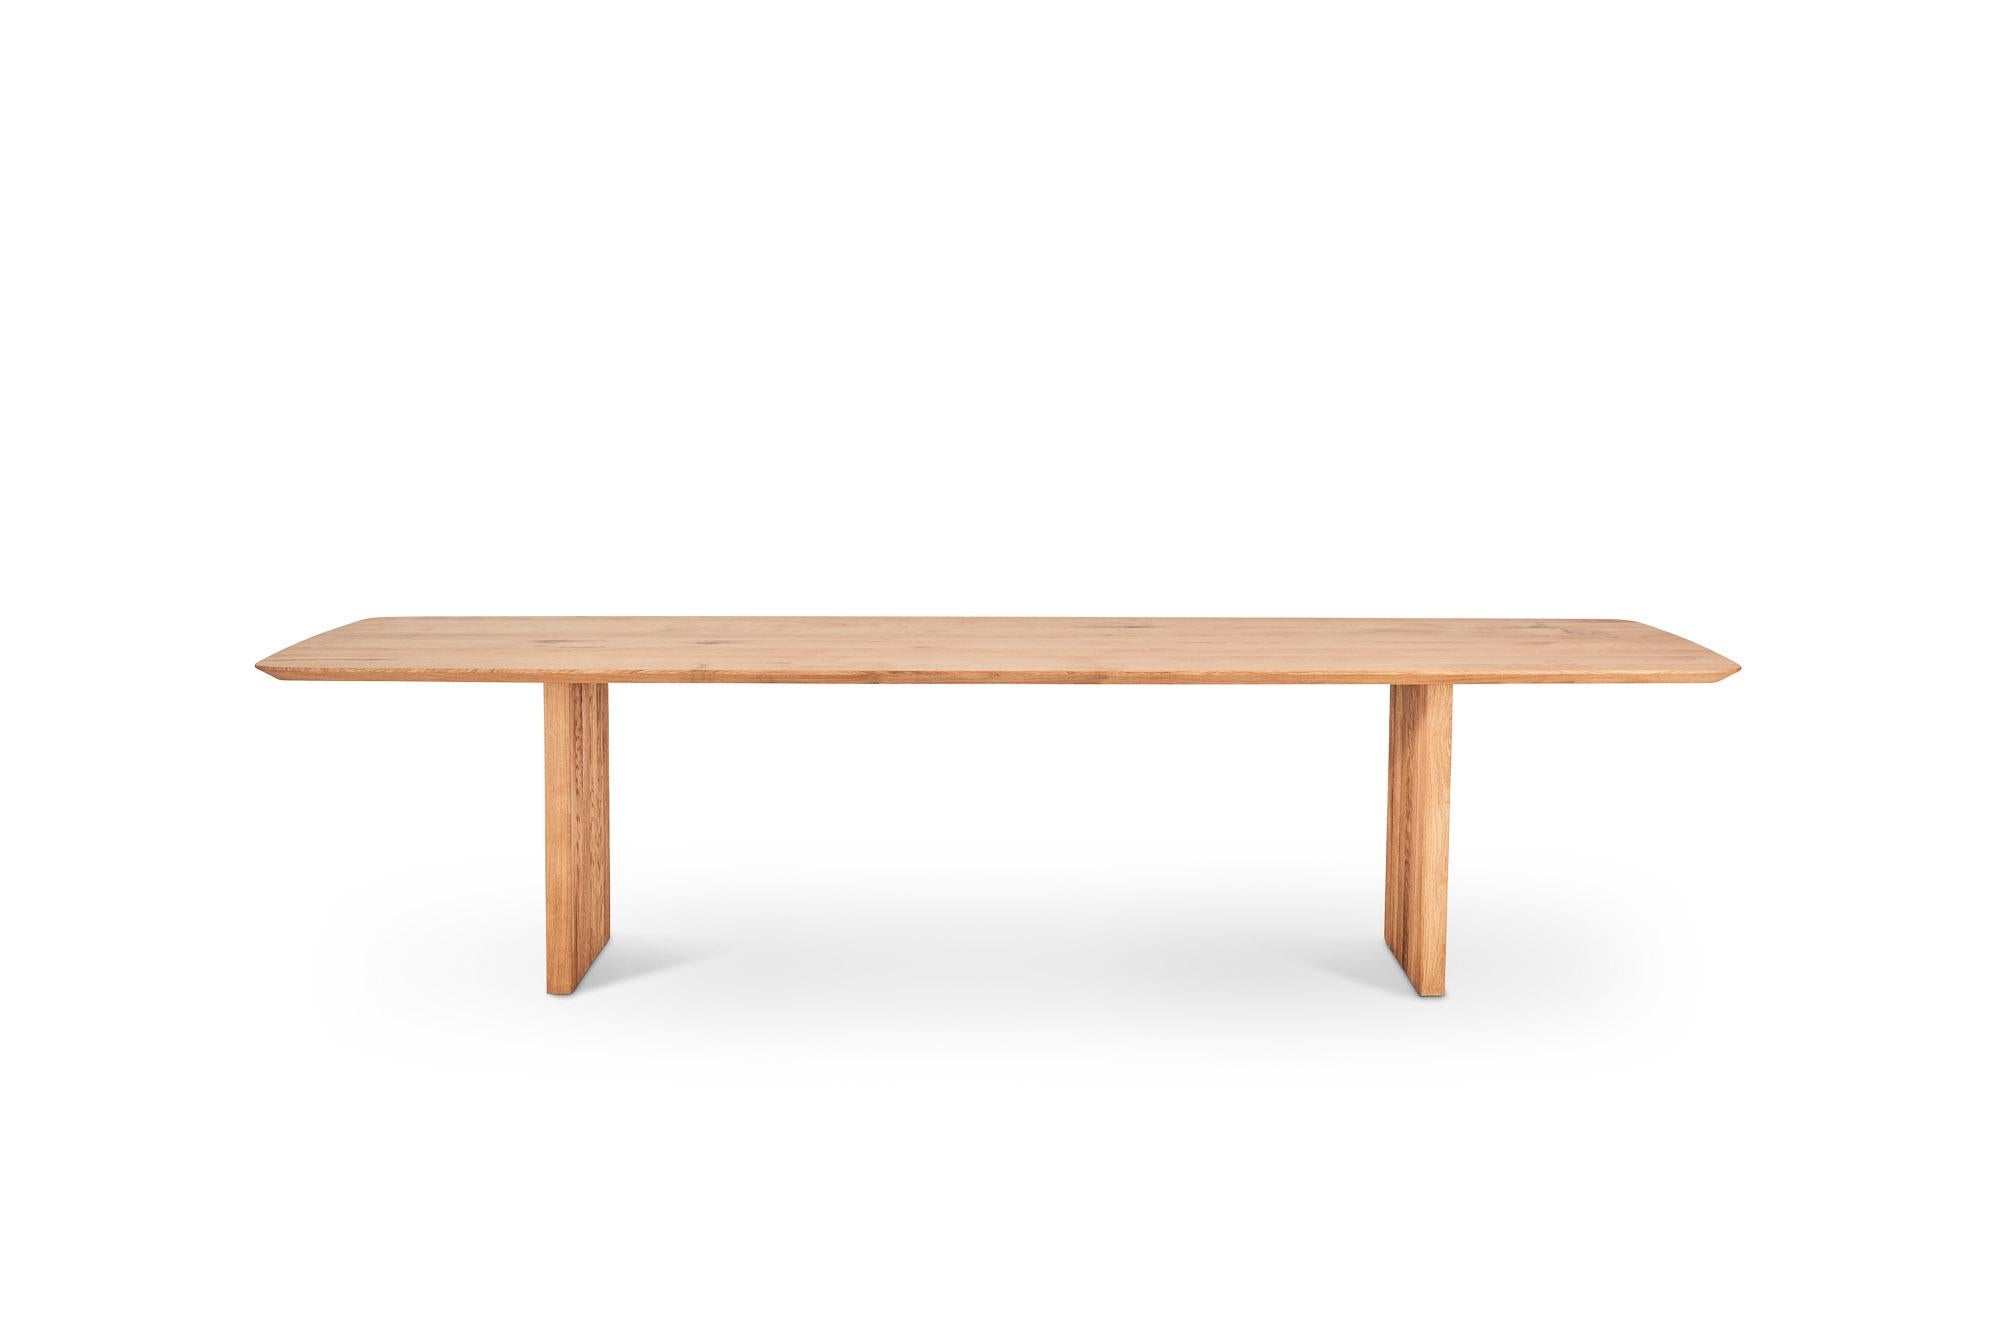 TEN dining table, rectangular, 340cm
Solid wood tabletop and legs. Handmade in Denmark.

Height: 72 or 74 cm

Tabletop dimensions:
– 200 x 95 cm
– 240 x 105 cm
– 270 x 105 cm
– 300 x 105 cm
– 340 x 105 cm
– 370 x 105 cm
– 400 x 105 cm

Tabletop’s